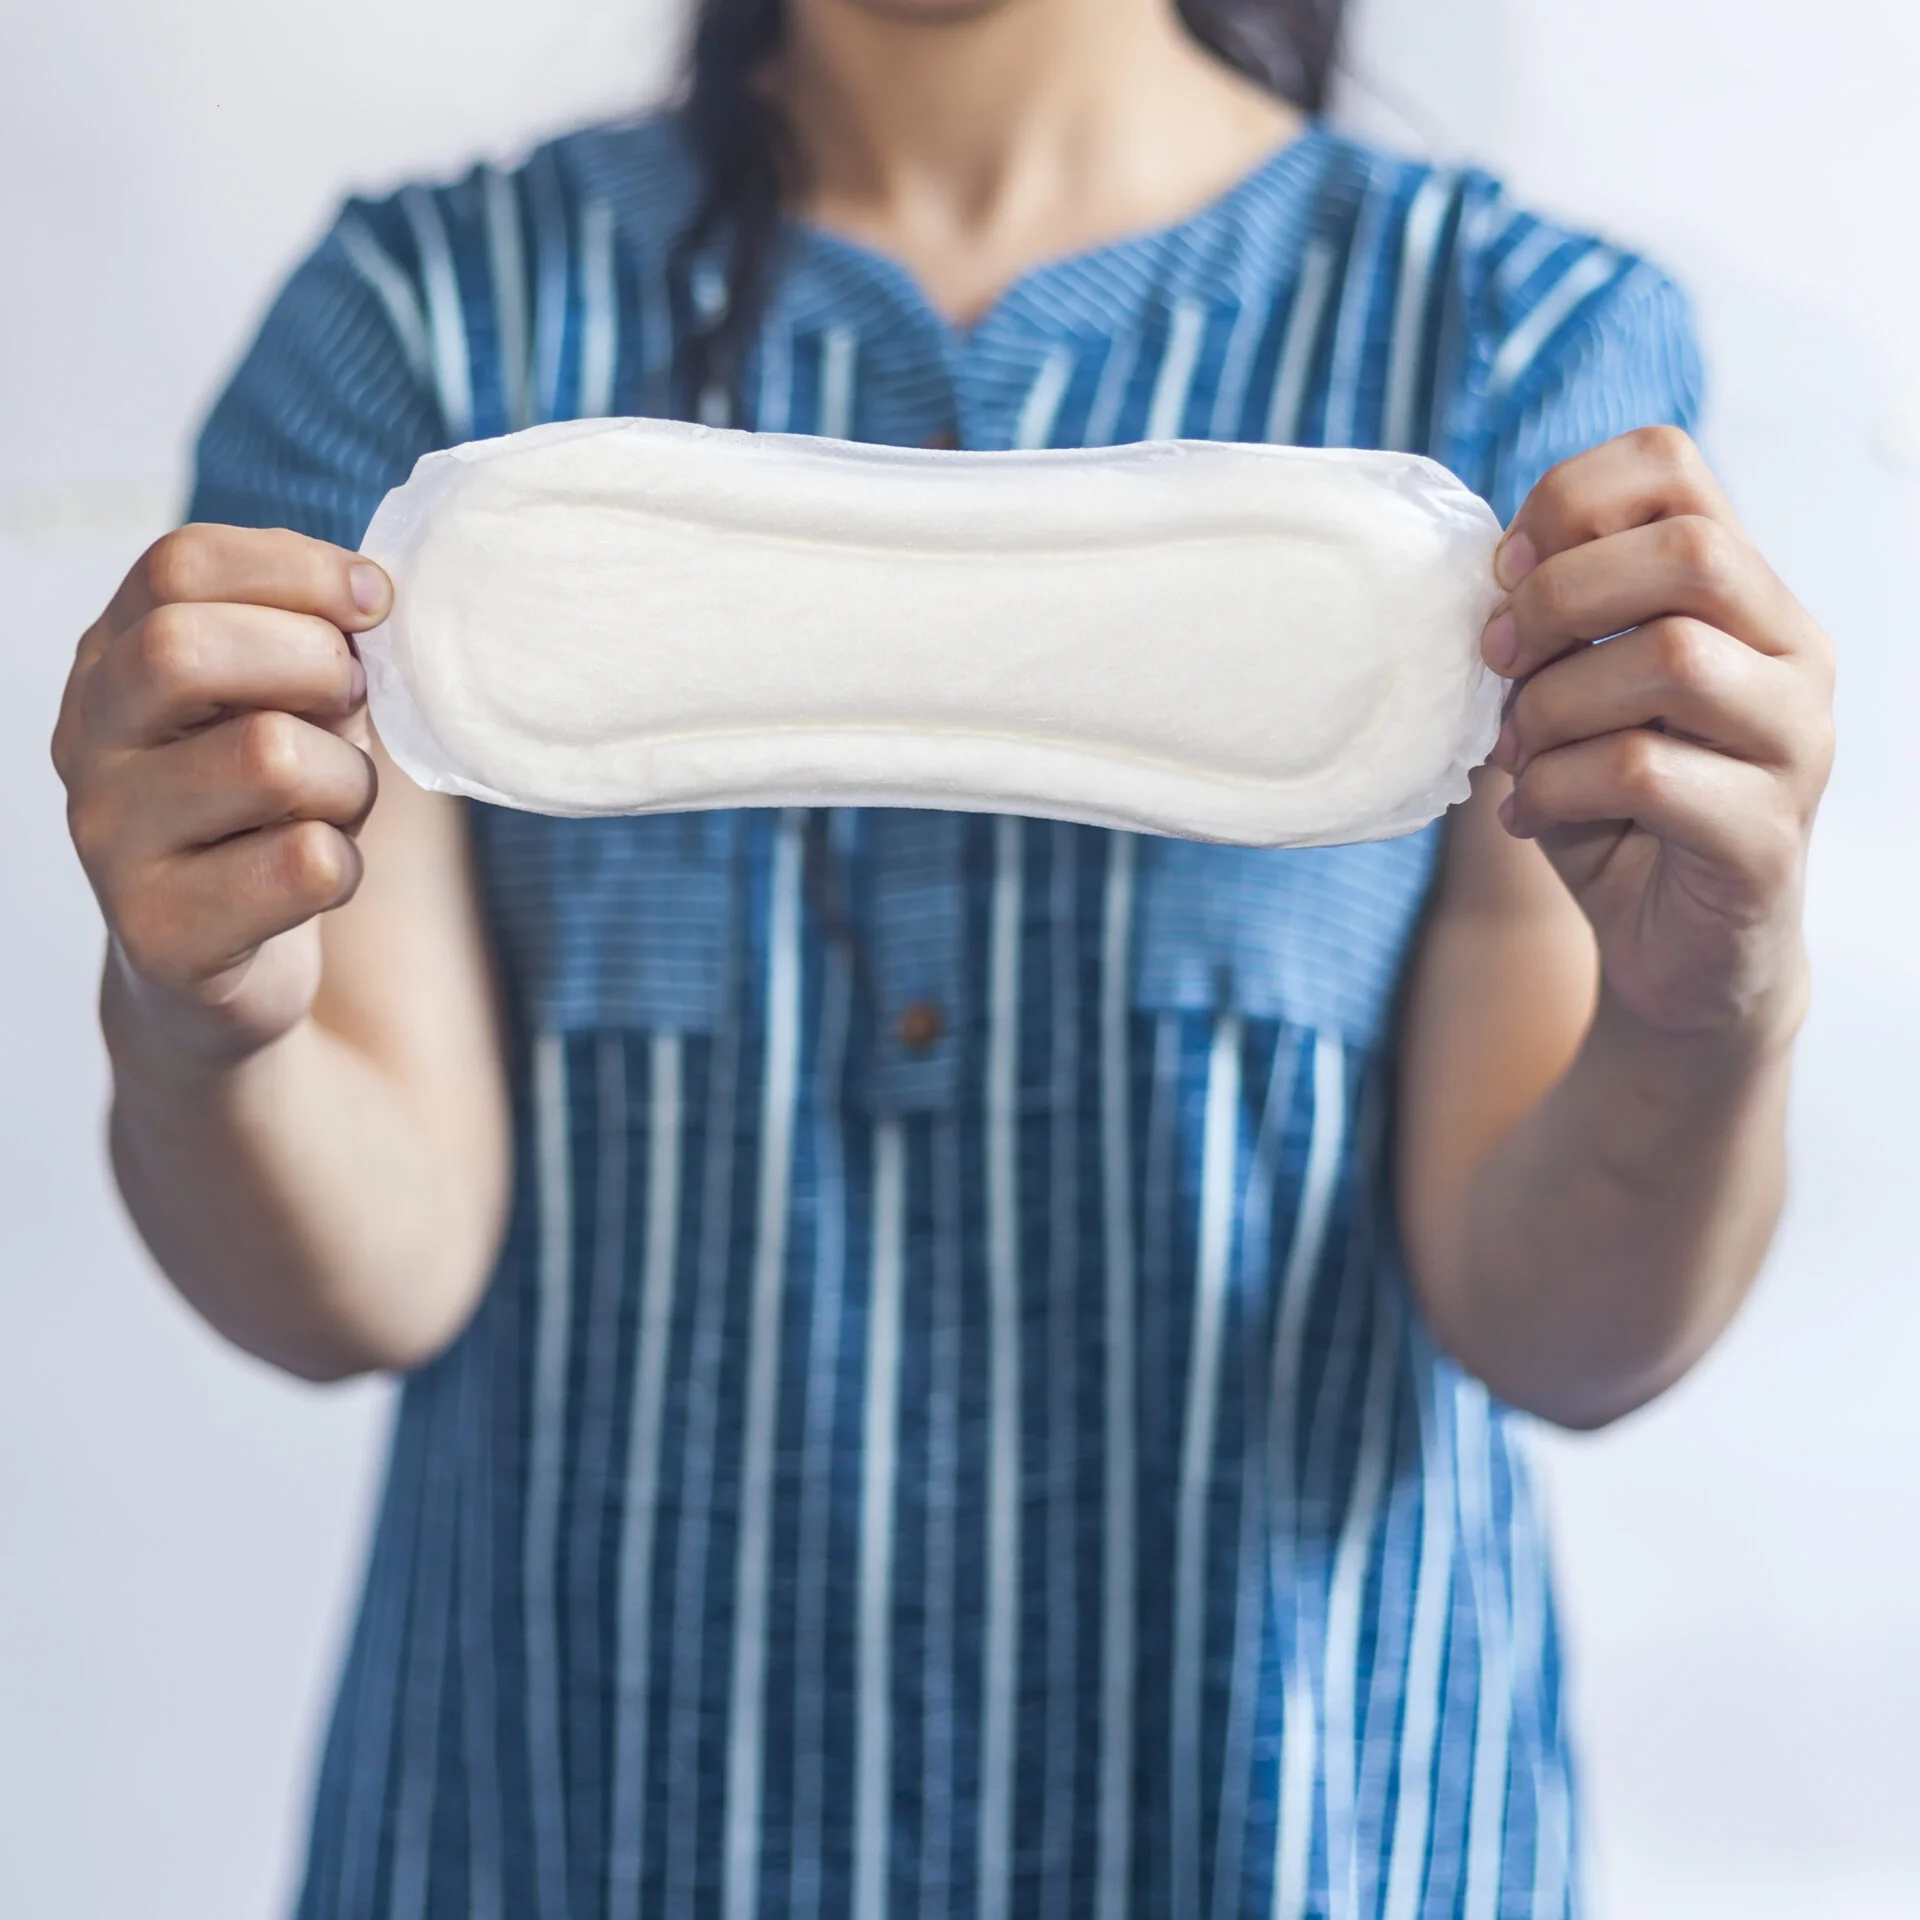 Female's hygiene products. Woman in medical gloves holding sanitary pads against the white background. Period days concept showing feminine menstrual cycle.